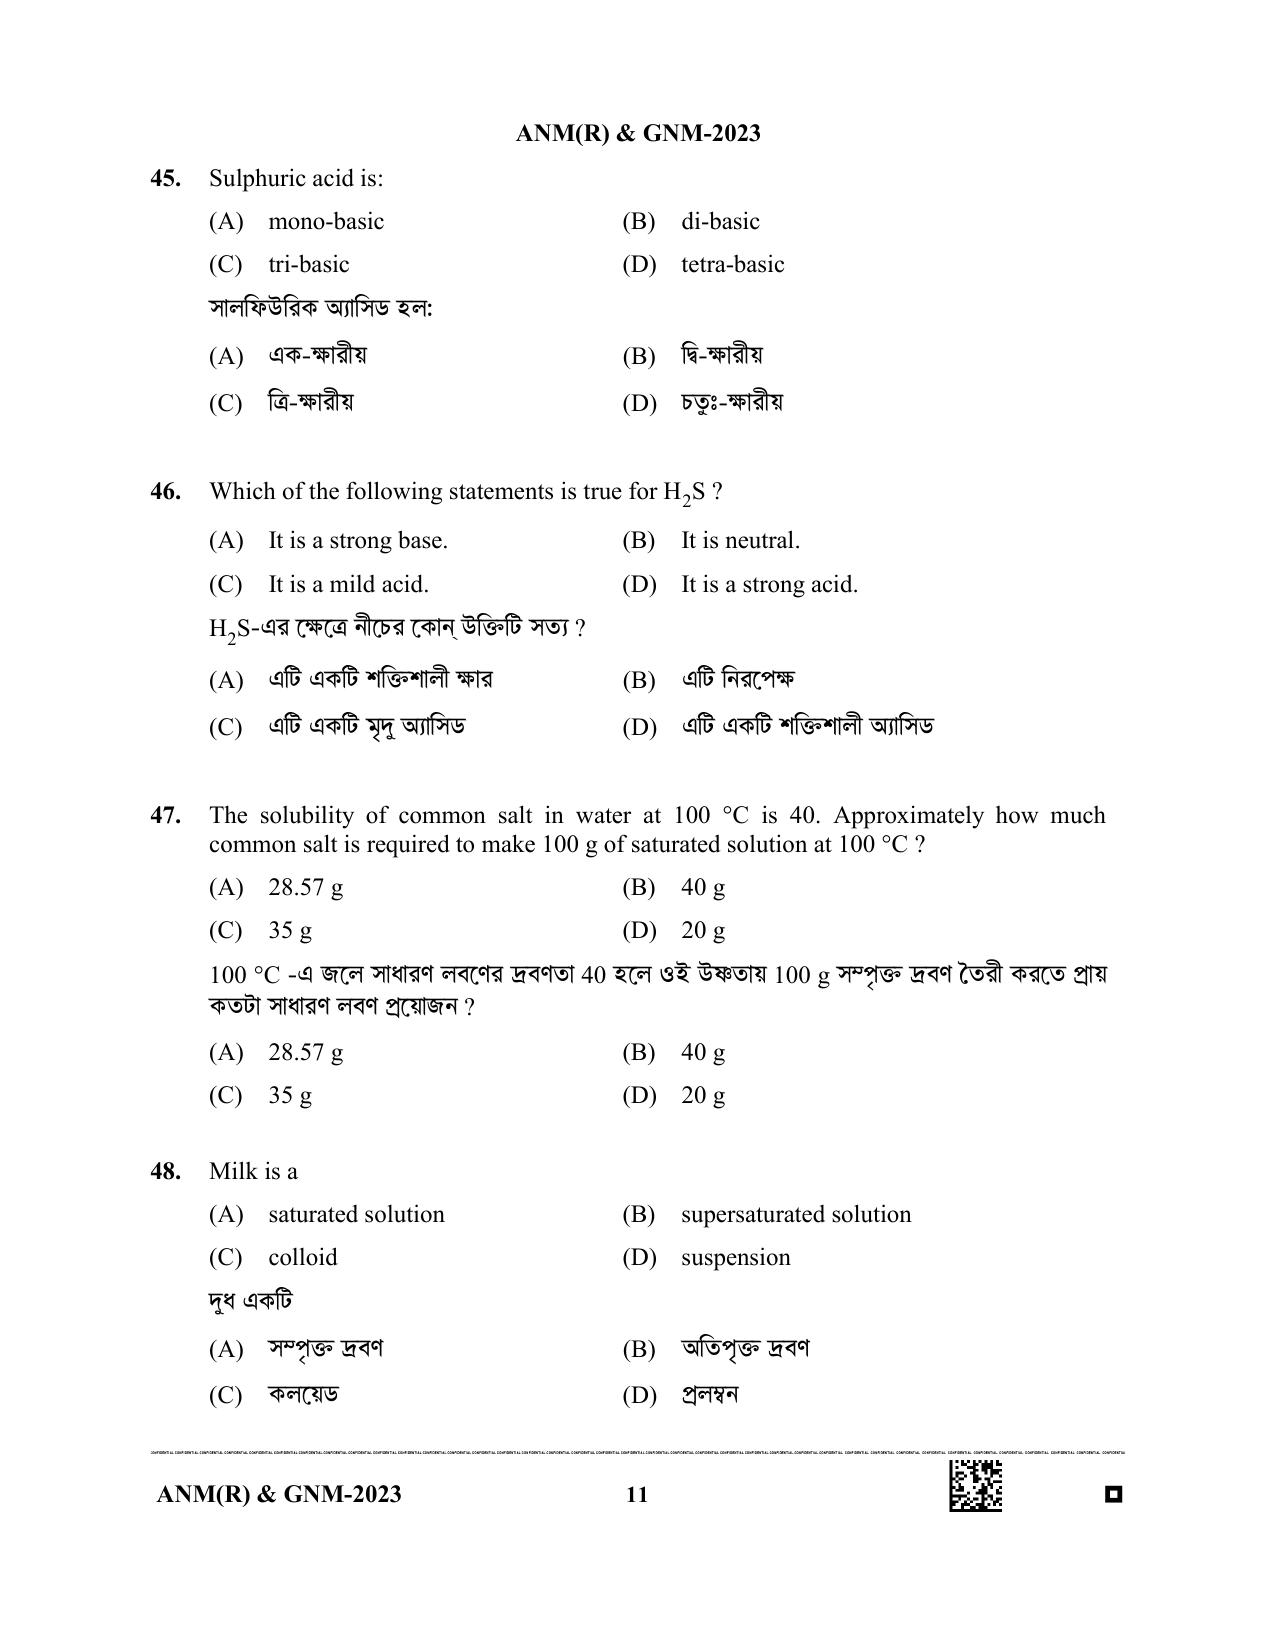 WB ANM GNM 2023 Question Paper - Page 11